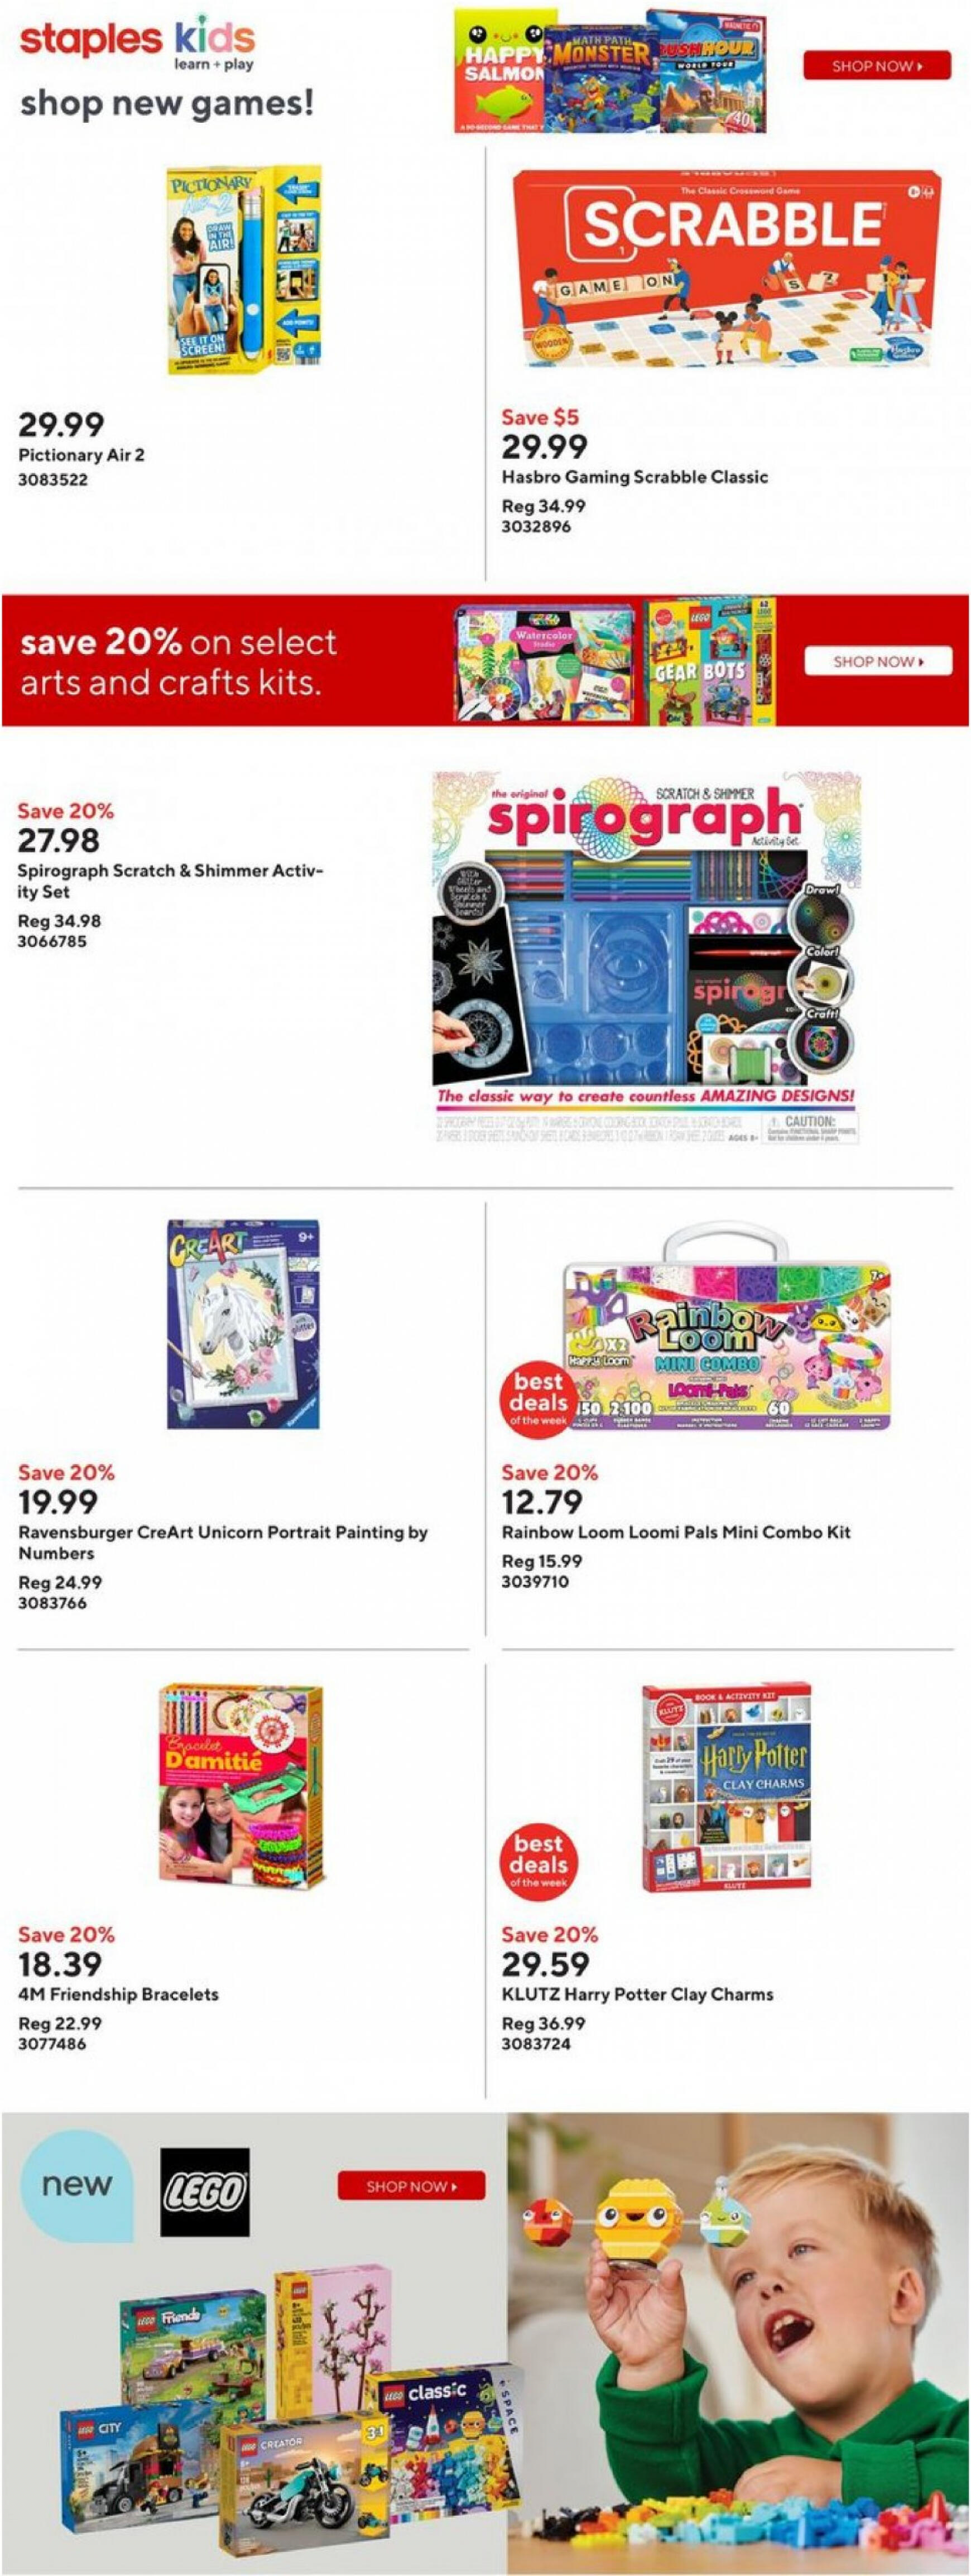 staples - Staples - Weekly flyer current 10.04. - 17.04. - page: 21